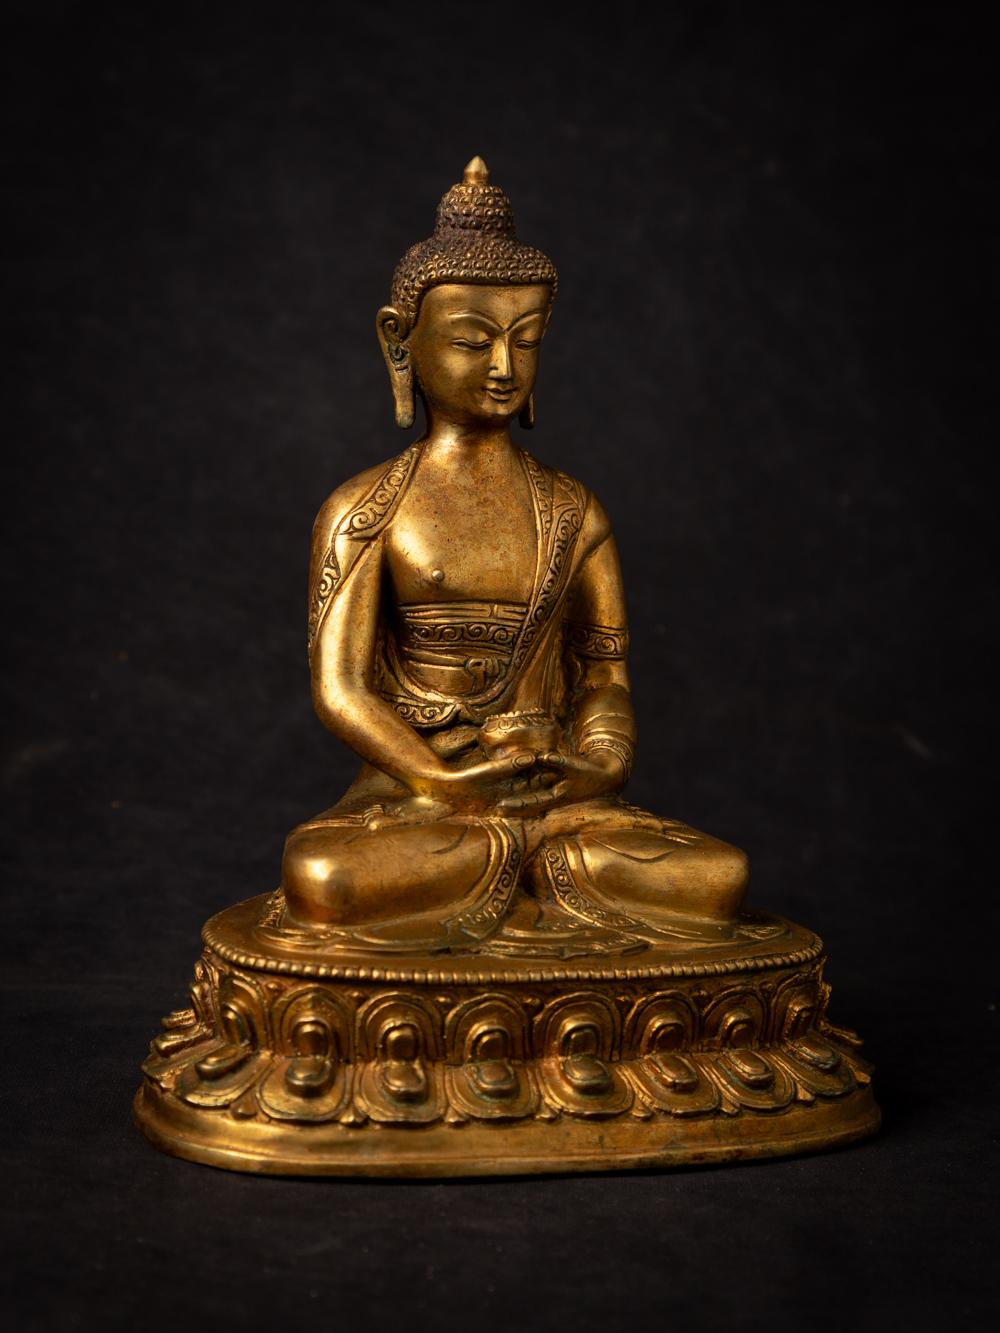 This old bronze Nepali Buddha statue is a captivating and spiritually significant piece of art. Crafted from bronze, it stands at a height of 21.2 cm with dimensions of 17.3 cm in width and 12.4 cm in depth. The statue beautifully depicts the Buddha